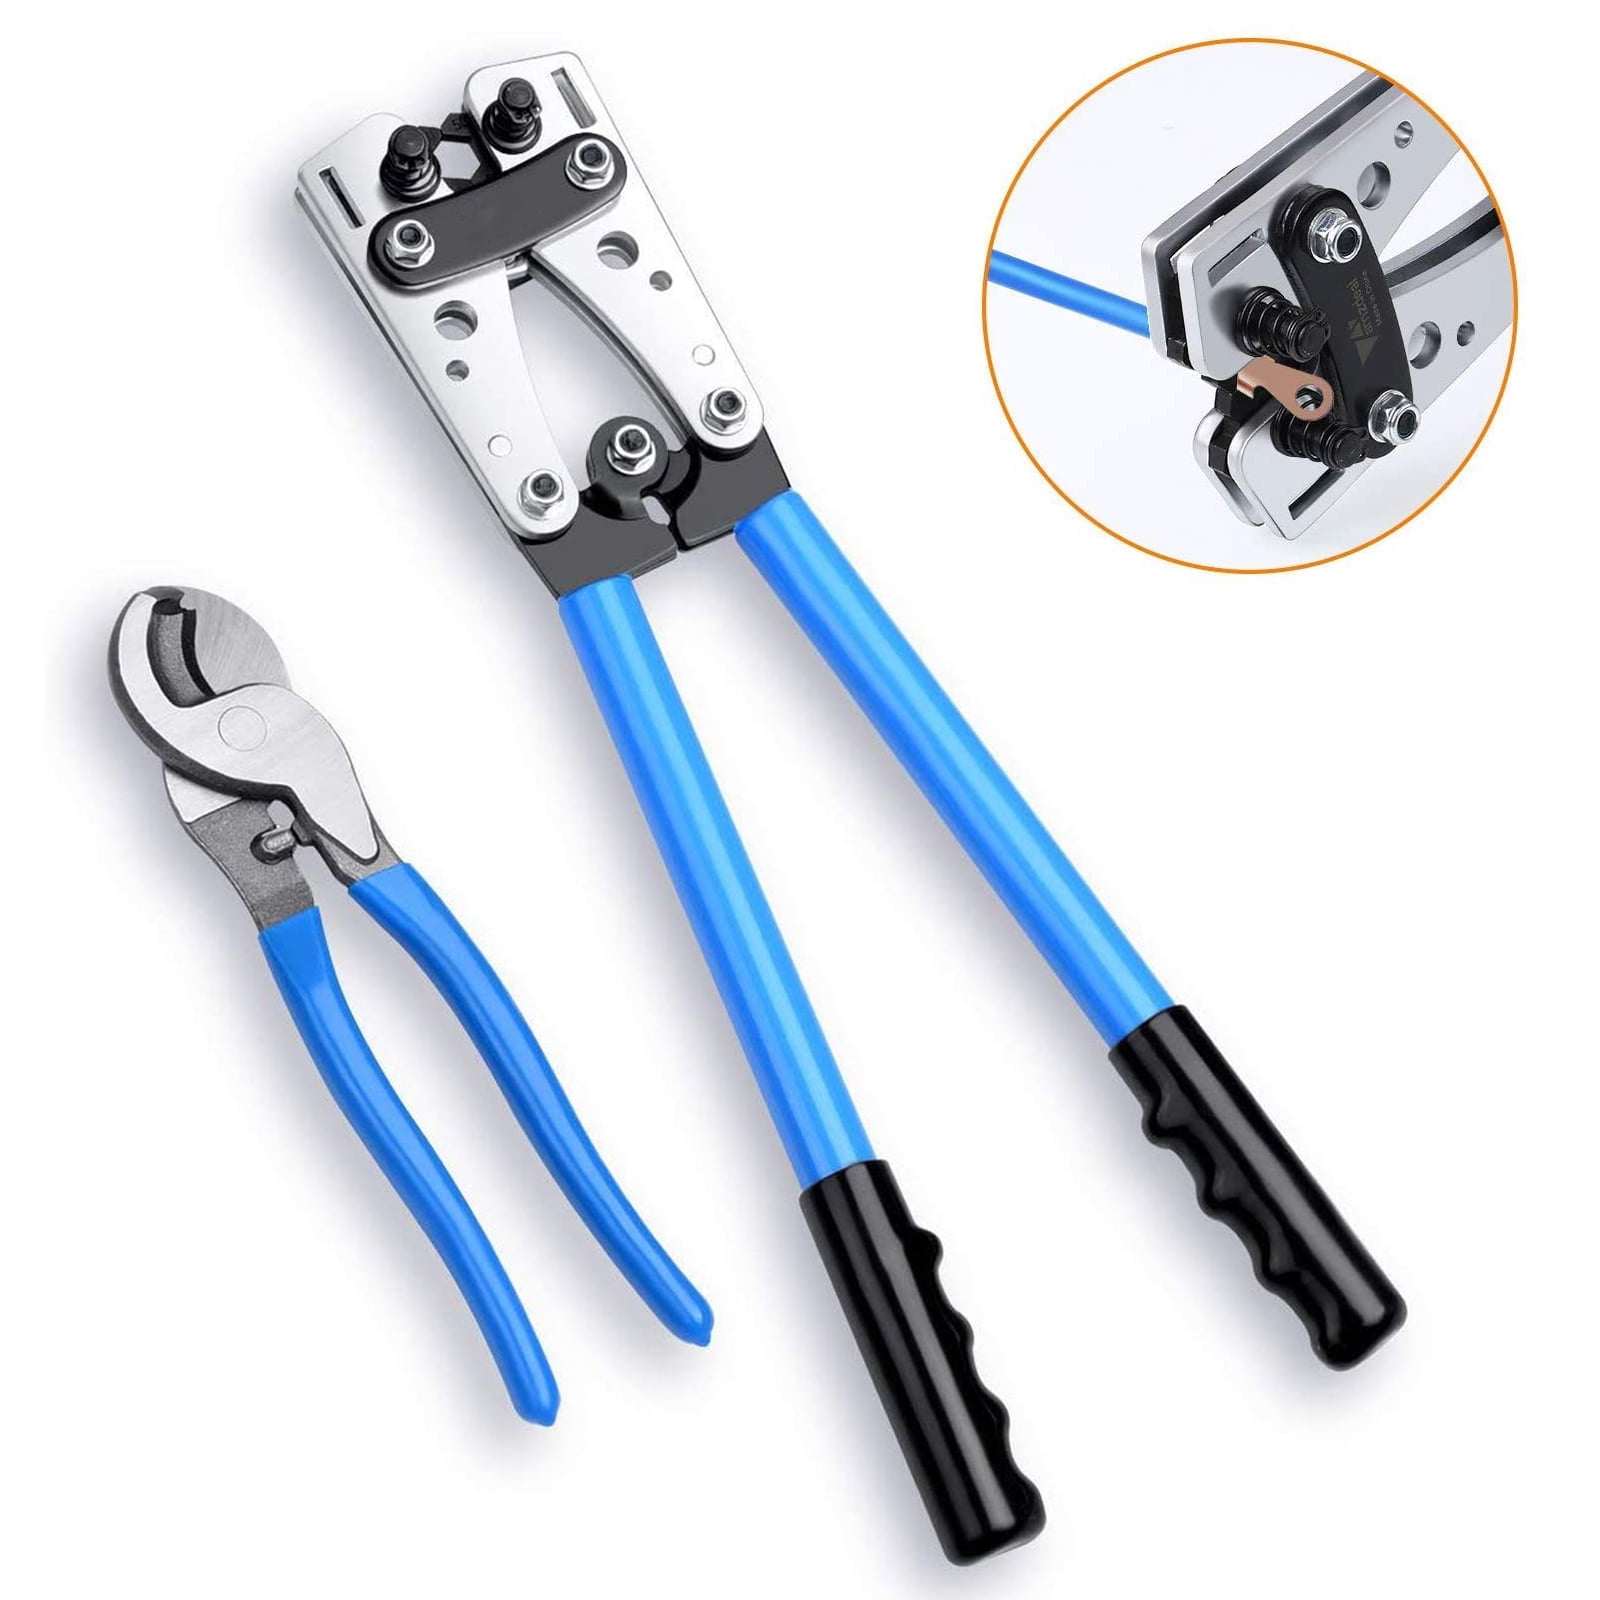 Details about   Crimping Plier Automatic Carbon Steel Electrical Hand Crimp Multifunctional Tool 